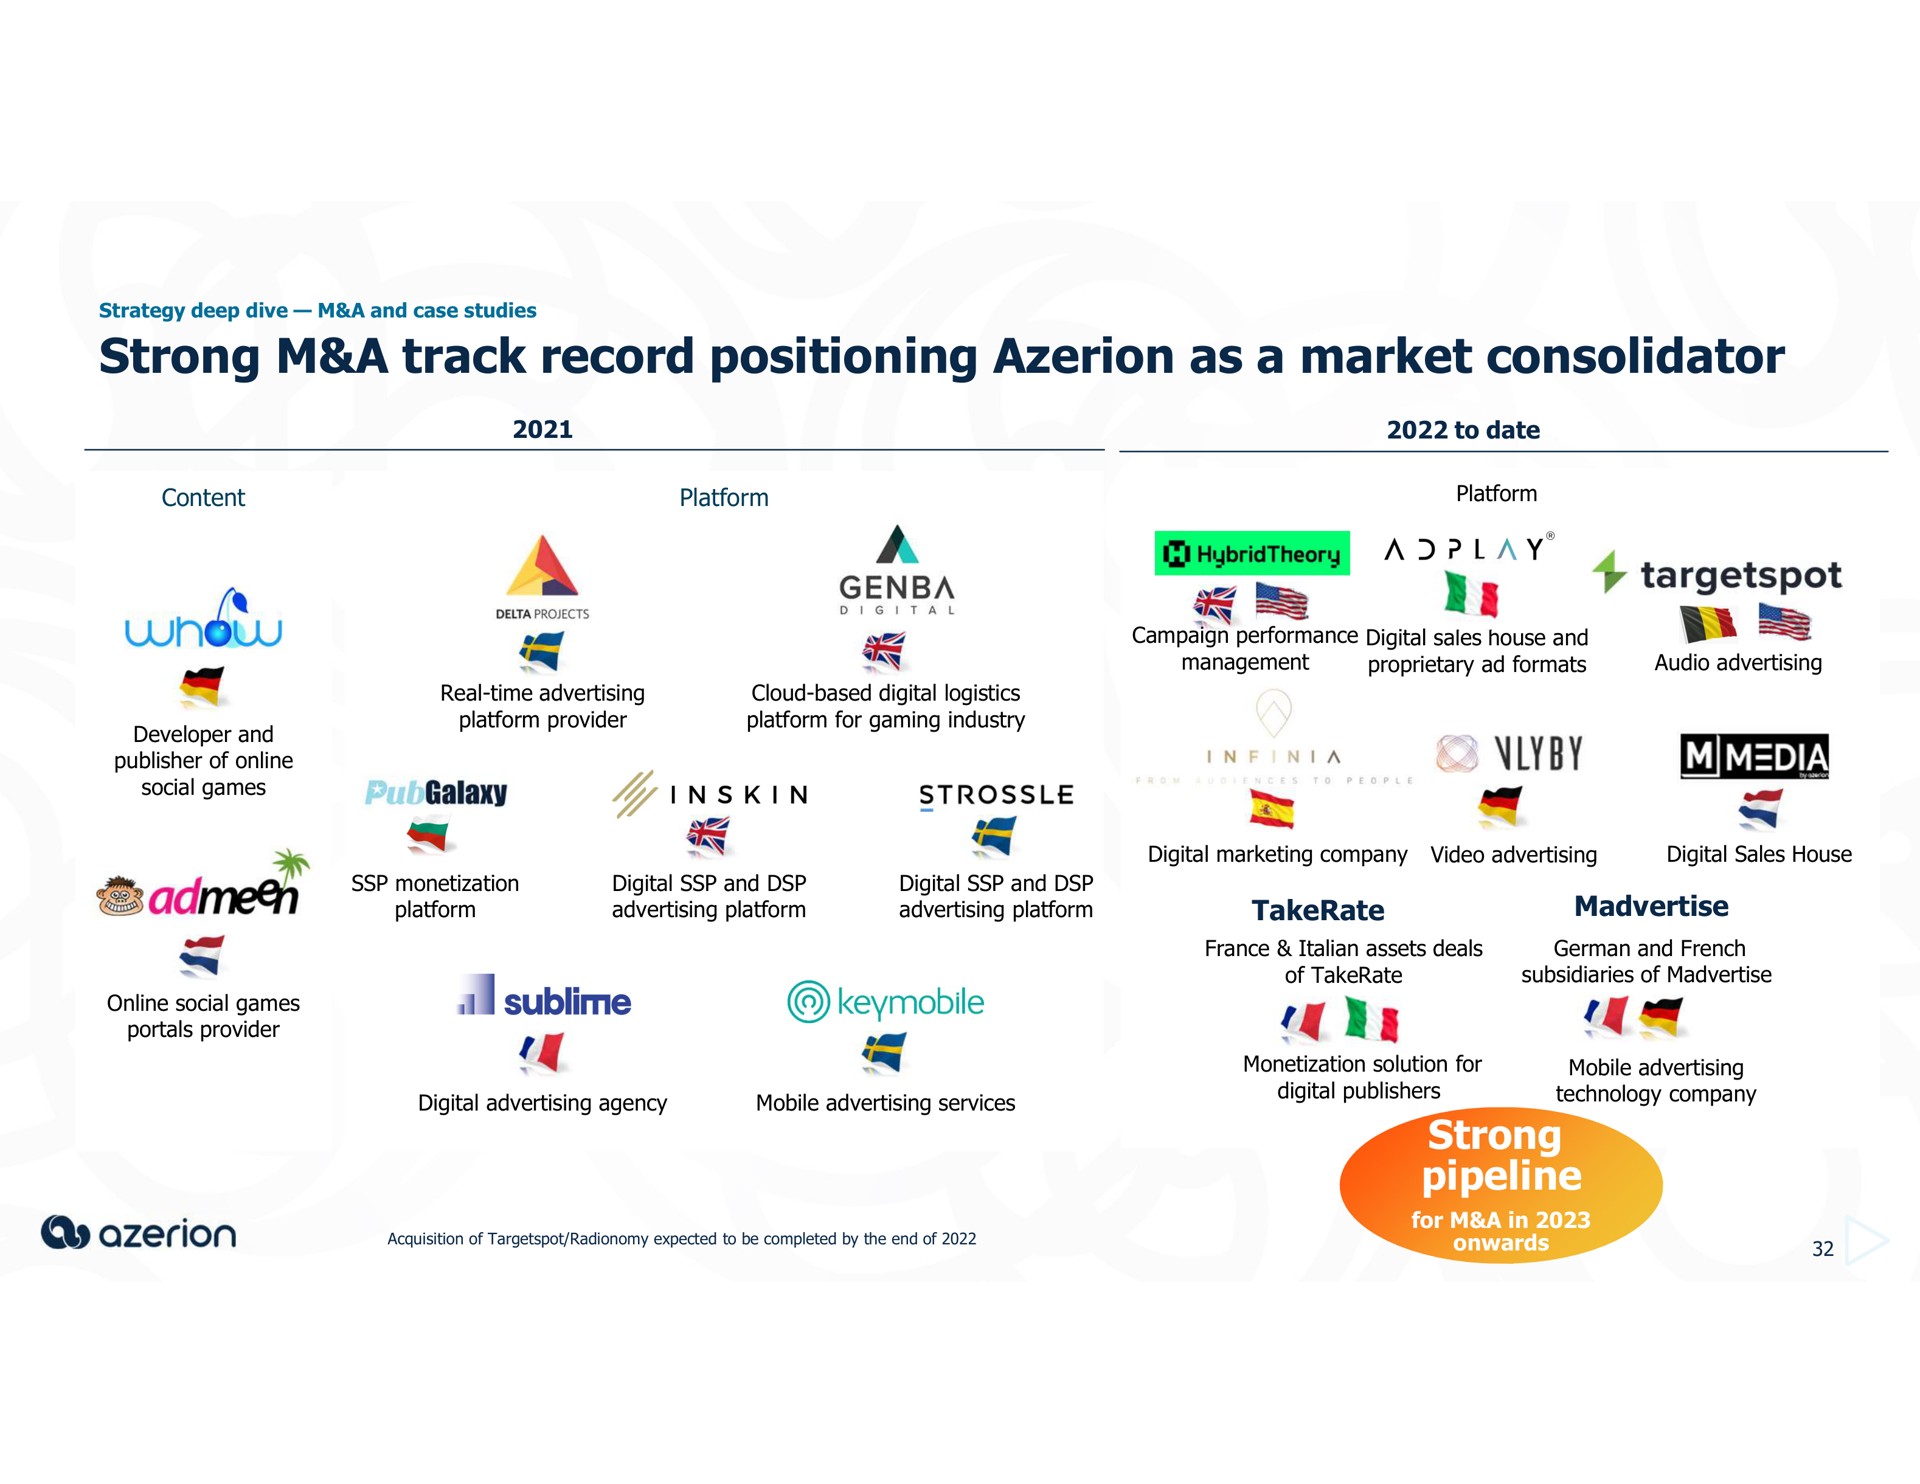 strong a track record positioning as a market consolidator strong pipeline wind i all sublime ing | Azerion